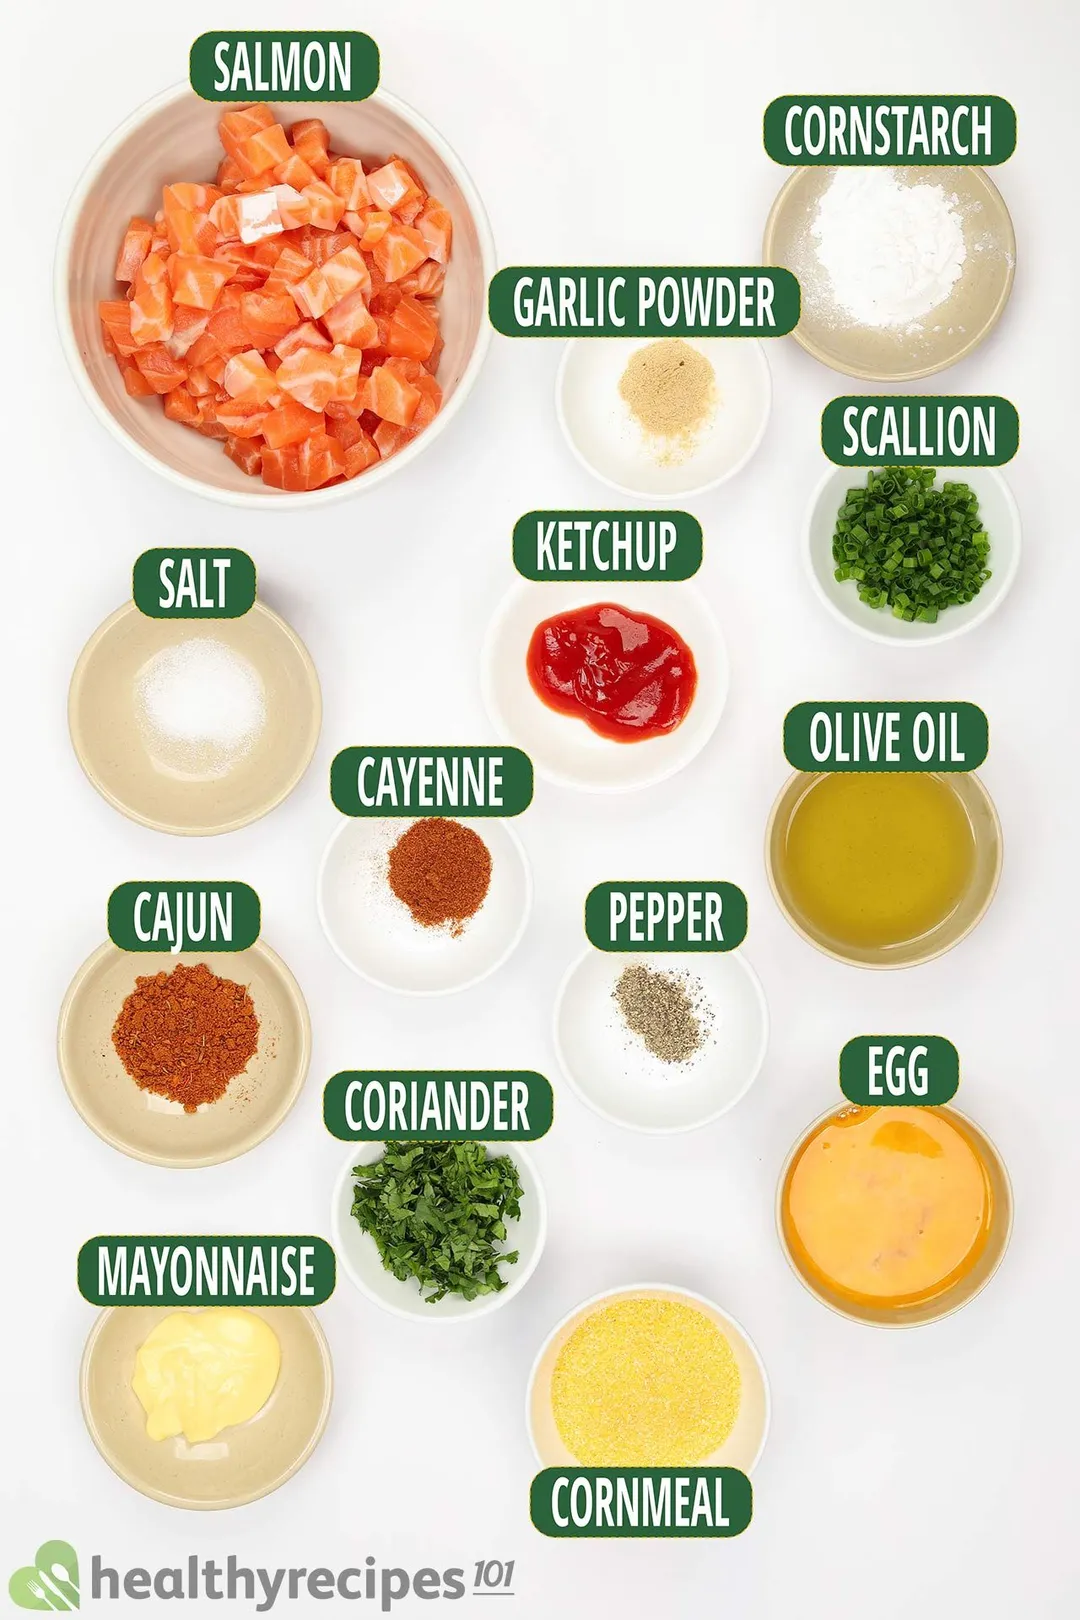 Ingredients list for Salmon patties in small bowls: cornmeal, salmon, cornstarch, olive oil, ketchup, mayonnaise